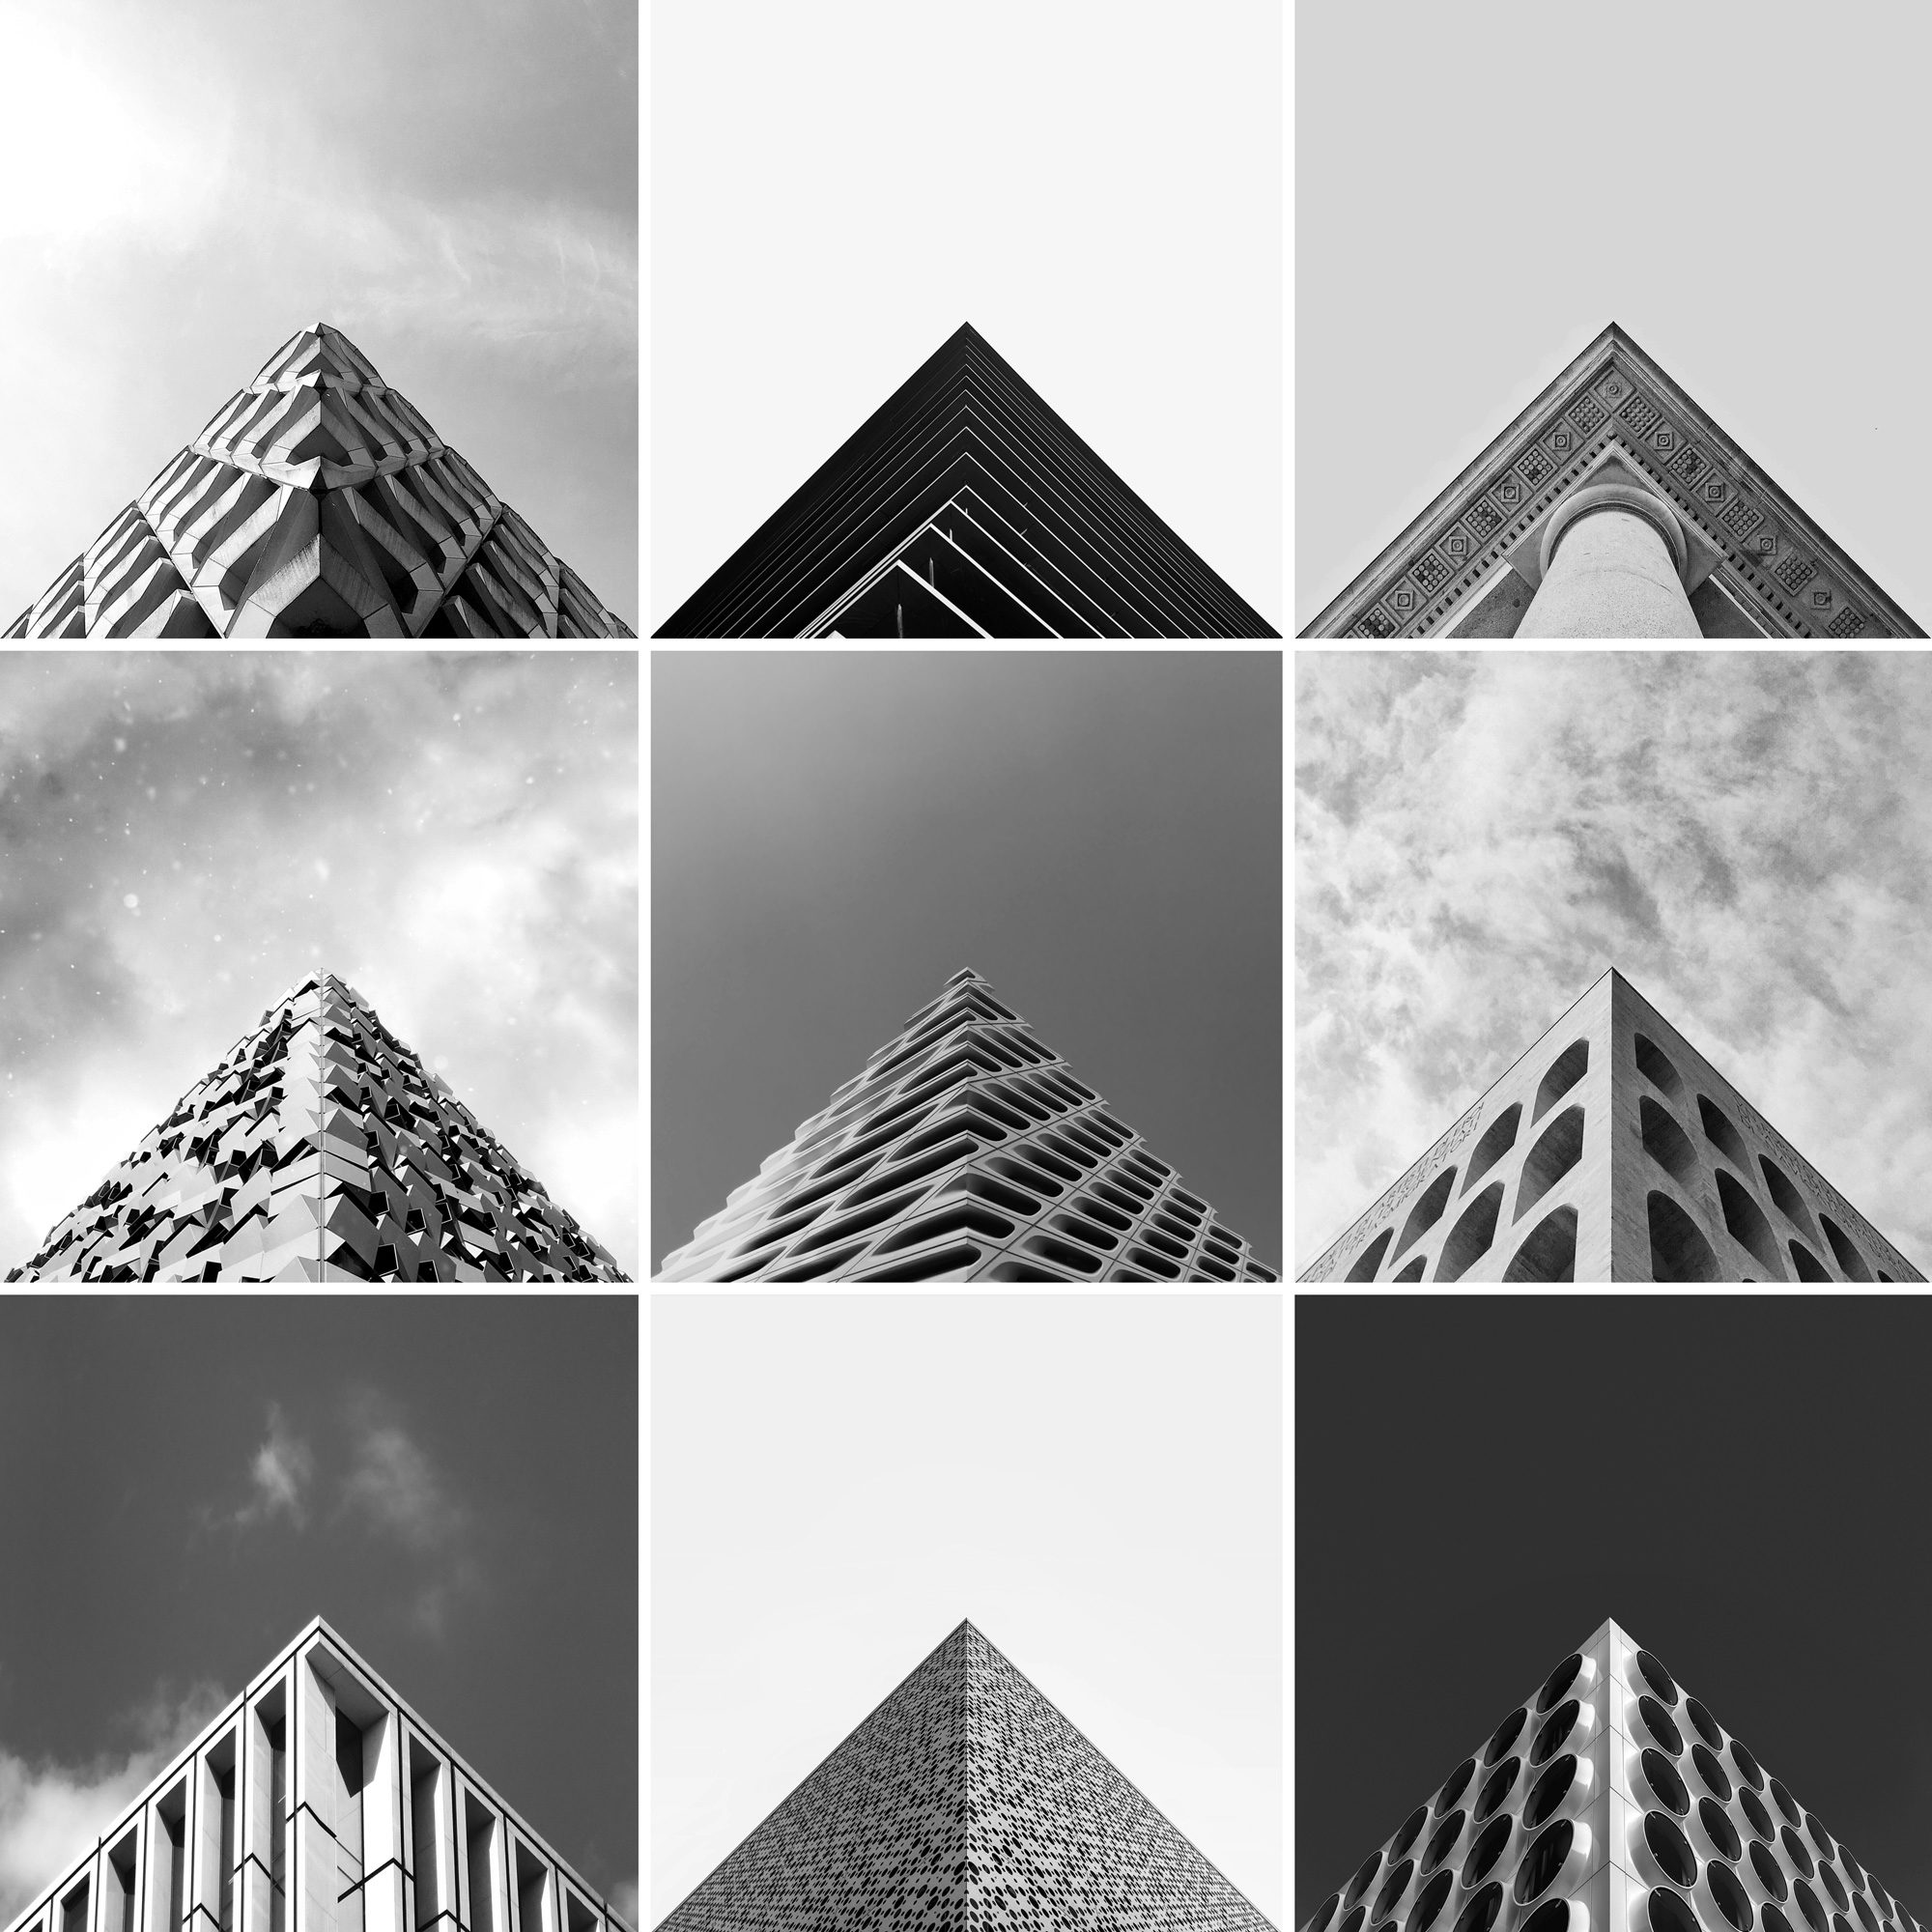 A selection of images featured on Dave Mullen's Instagram account, @geometryclub